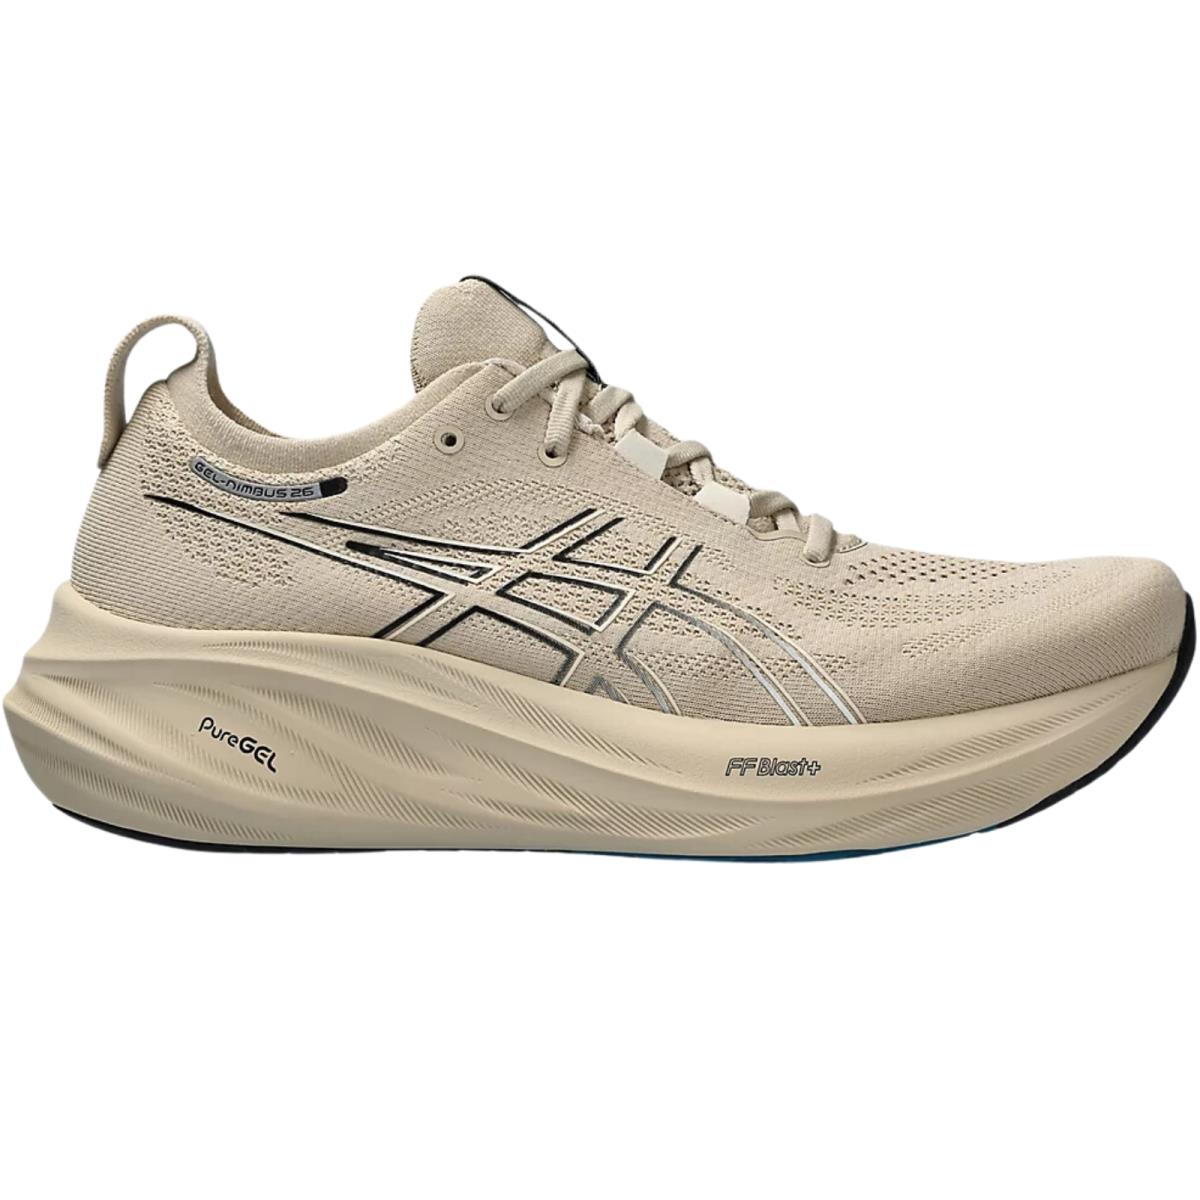 Men`s Asics Gel-nimbus 26 Running Shoes All Colors US Sizes 7-14 Feather Grey/Black